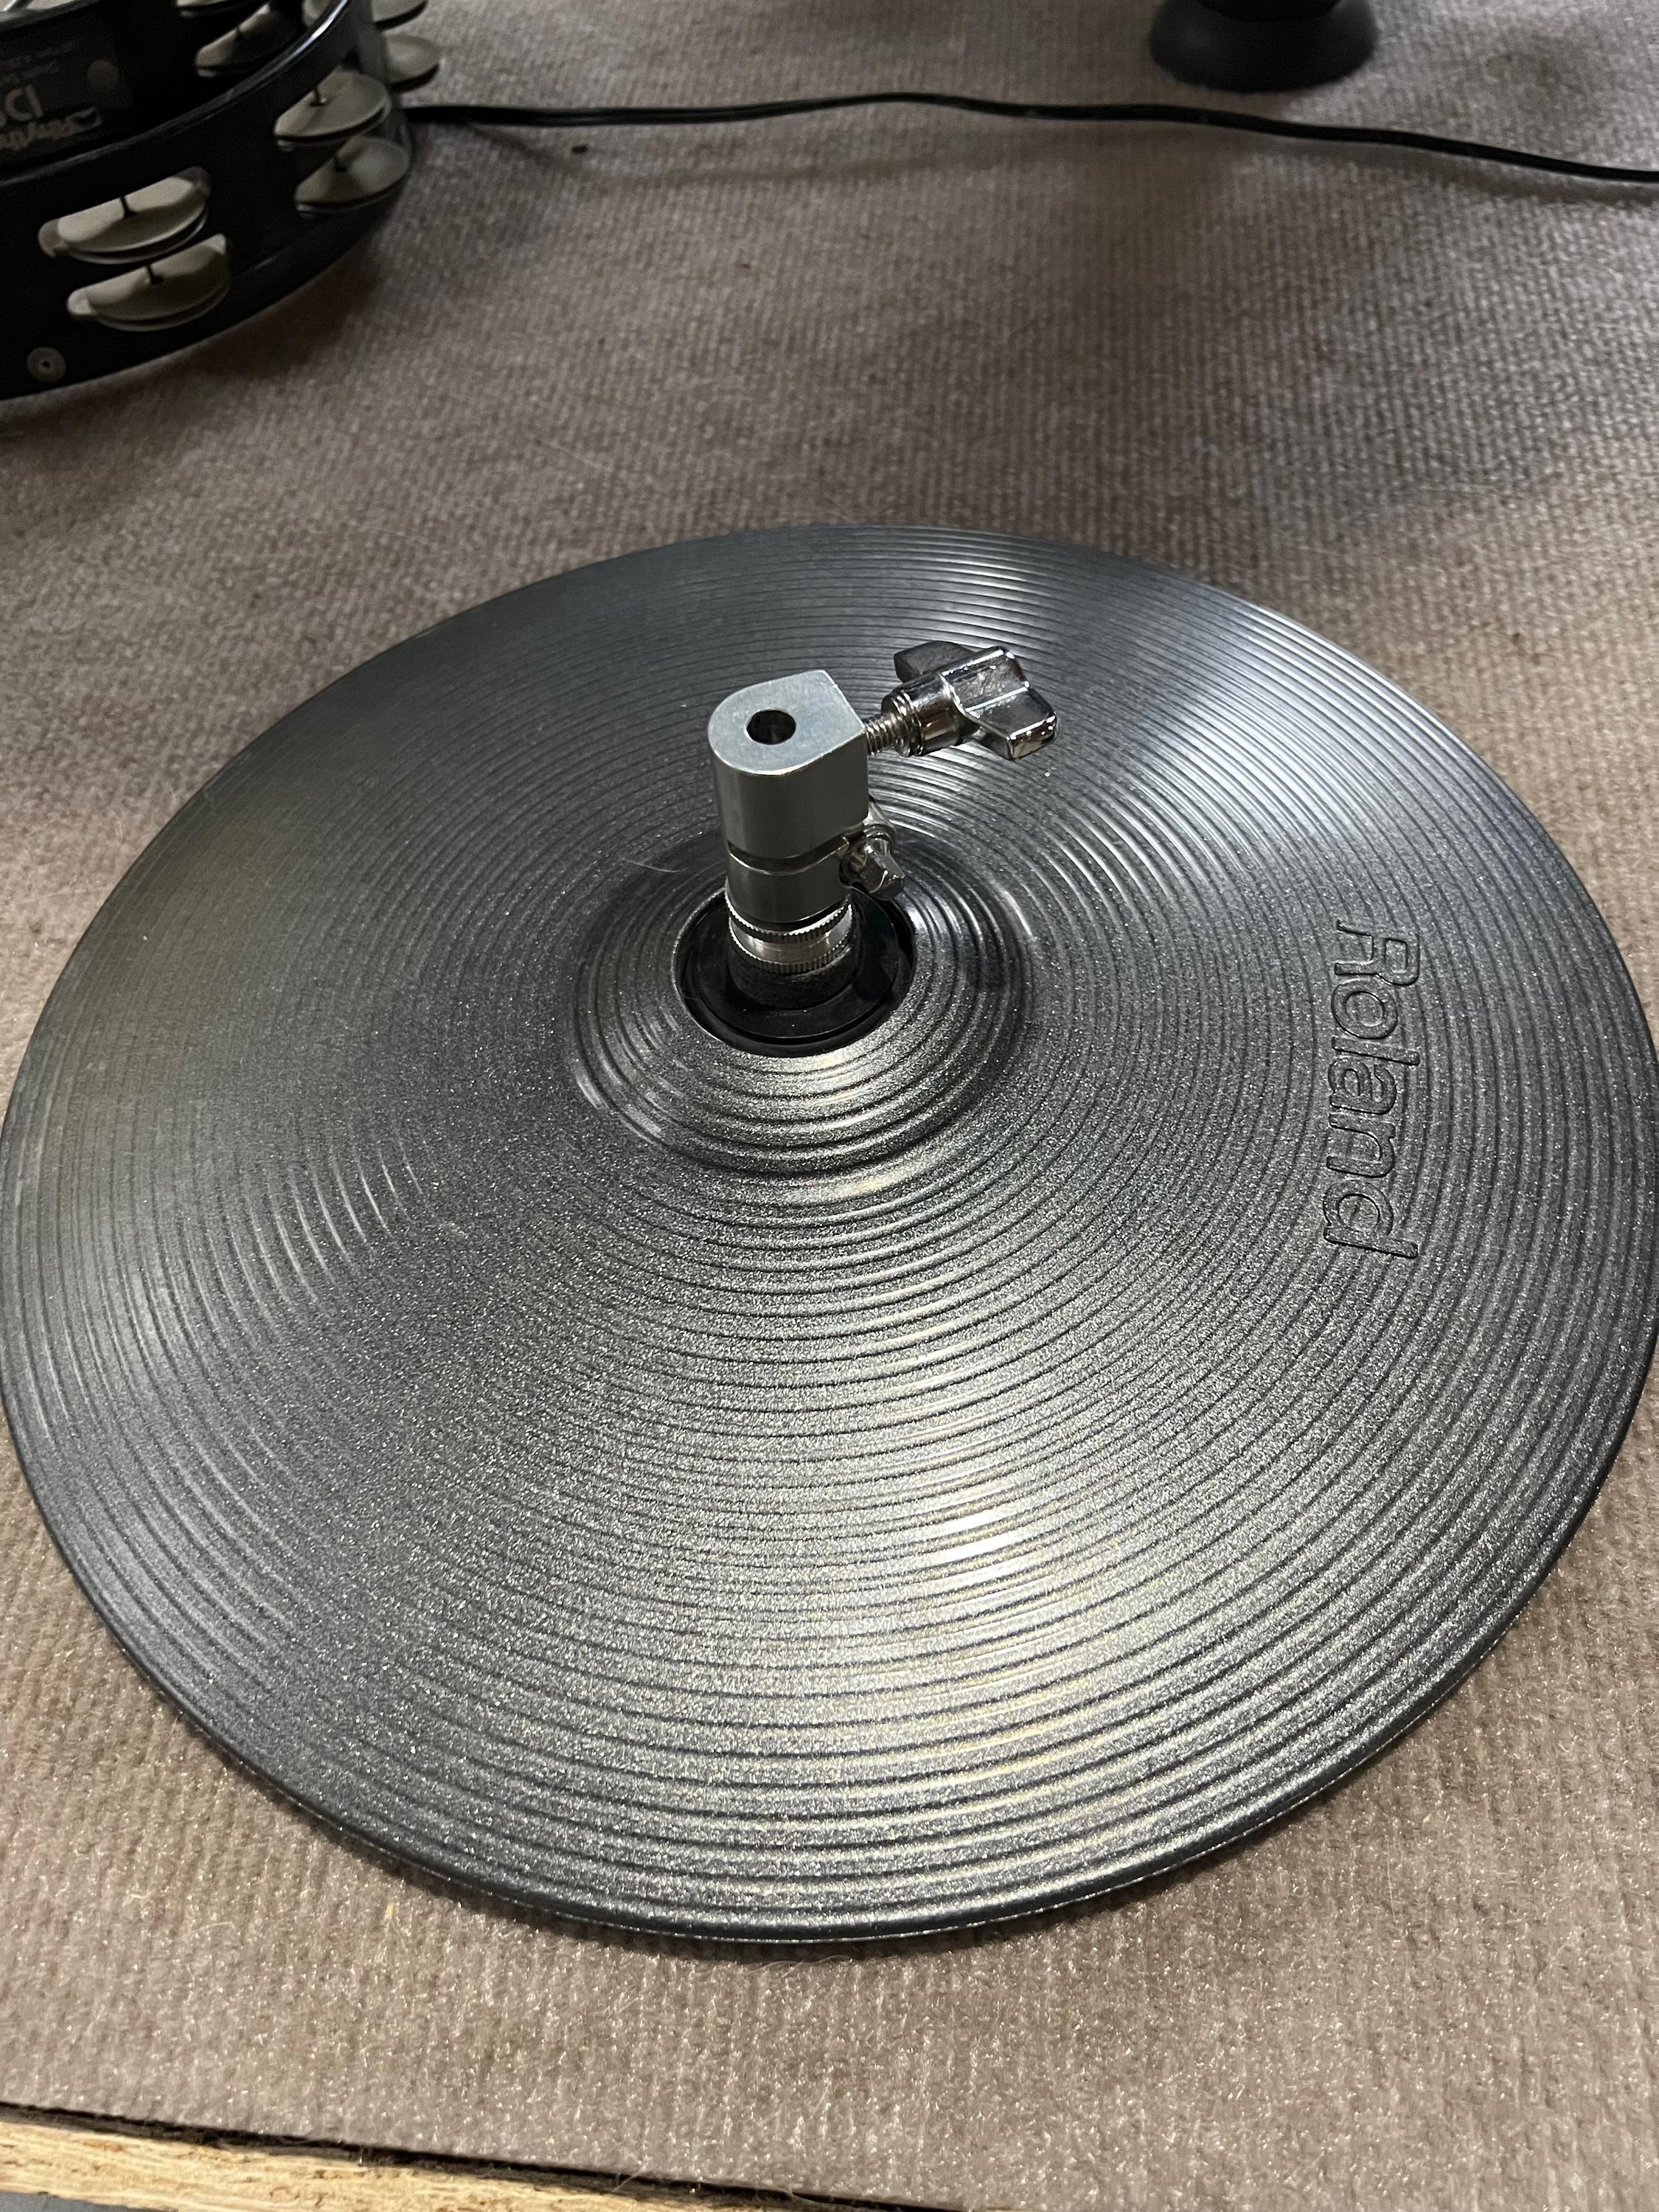 Used Roland VH-13 HI-HAT - Sweetwater's Gear Exchange